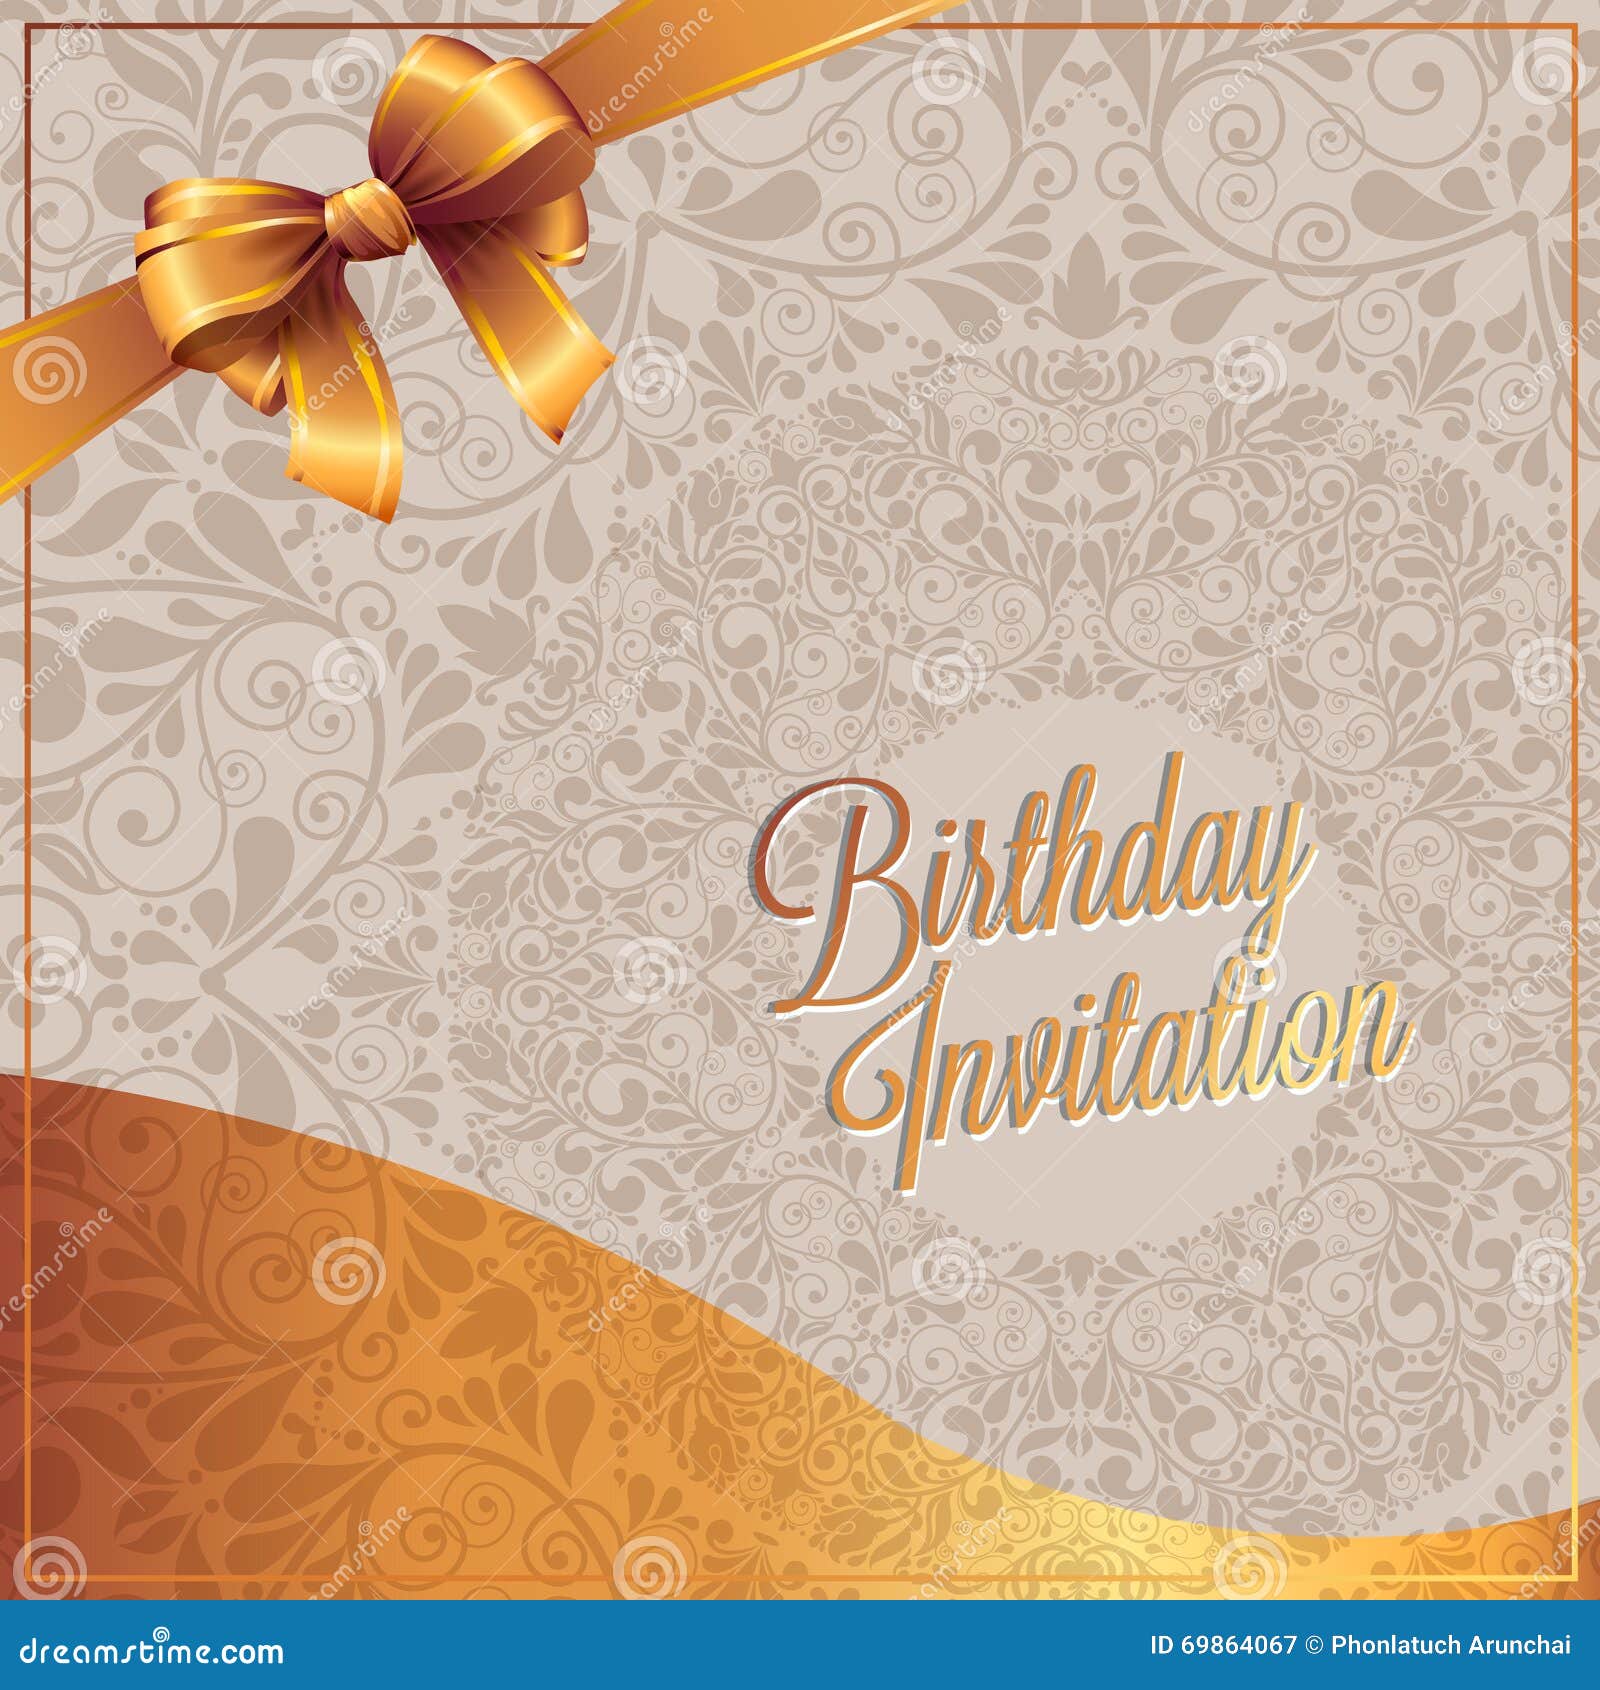 The Birthday Card and Gold Ribbon with Background Design Stock Vector ...